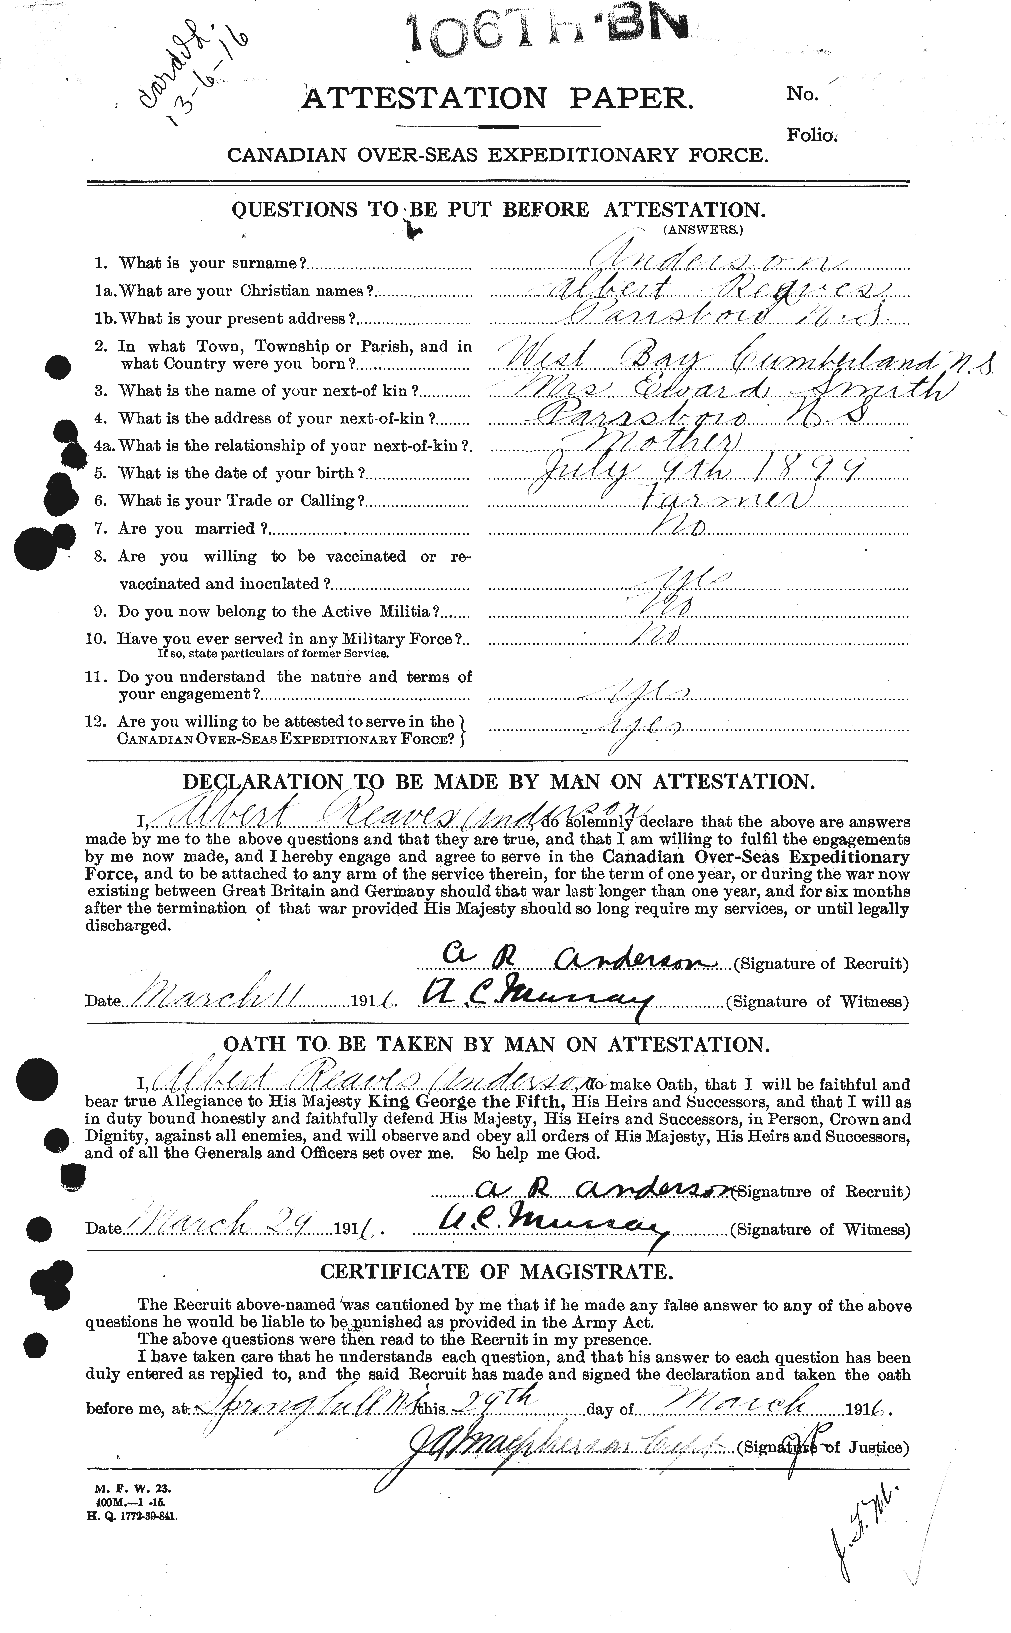 Personnel Records of the First World War - CEF 209536a